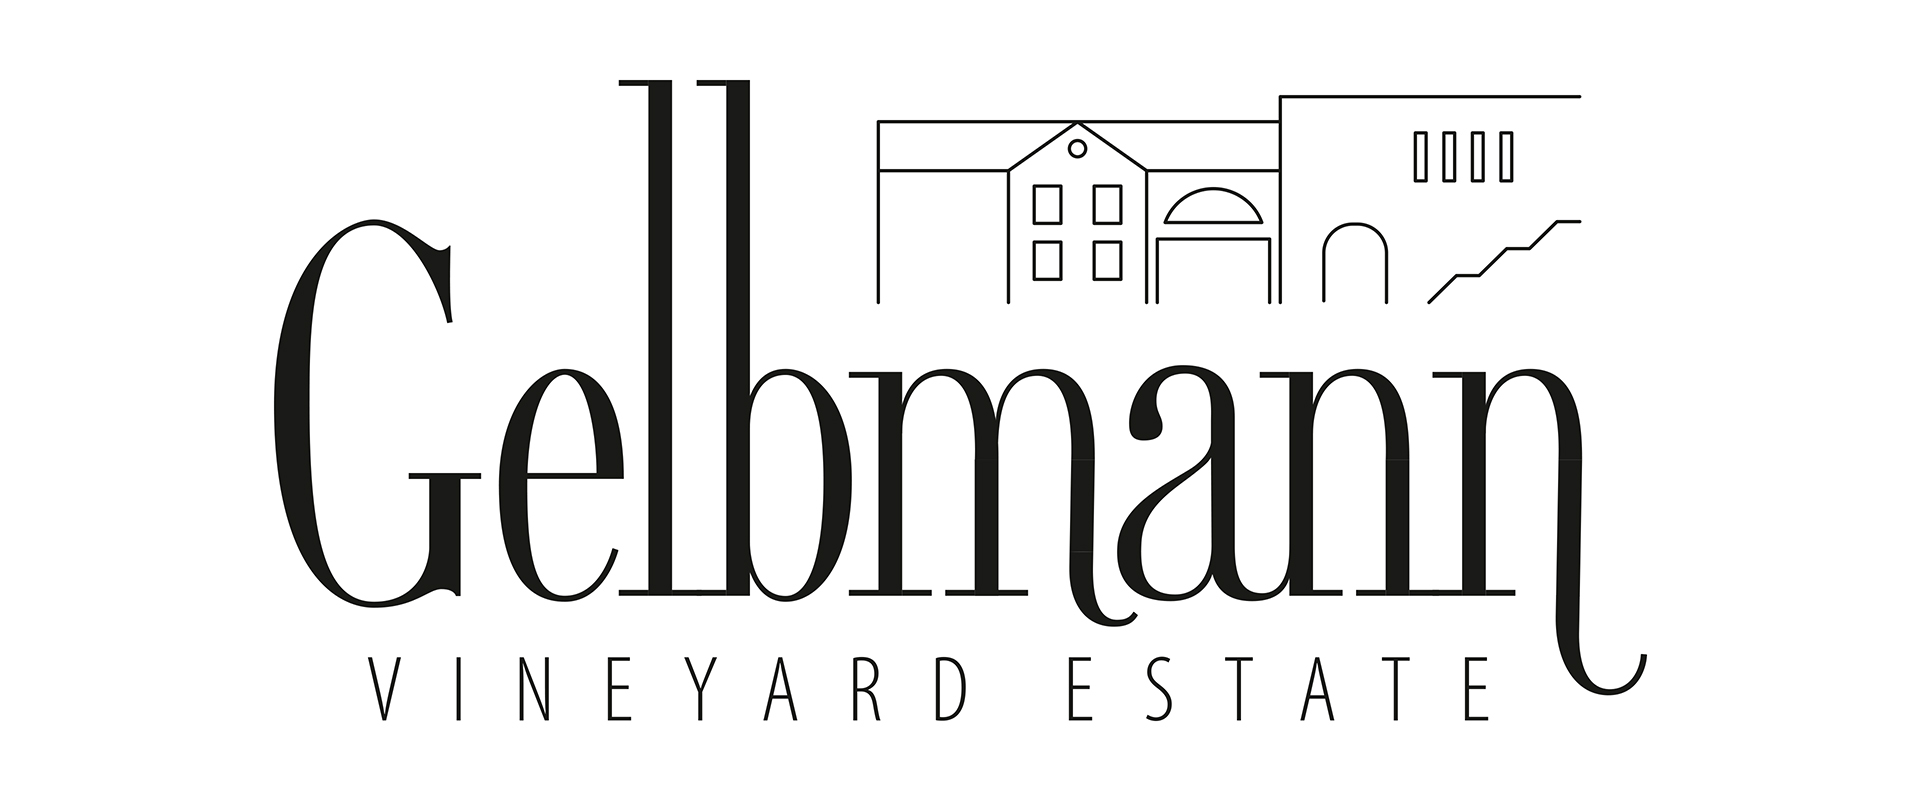 The logo is a part of the branding – it is for the Gelbmann Vineyard Estate...